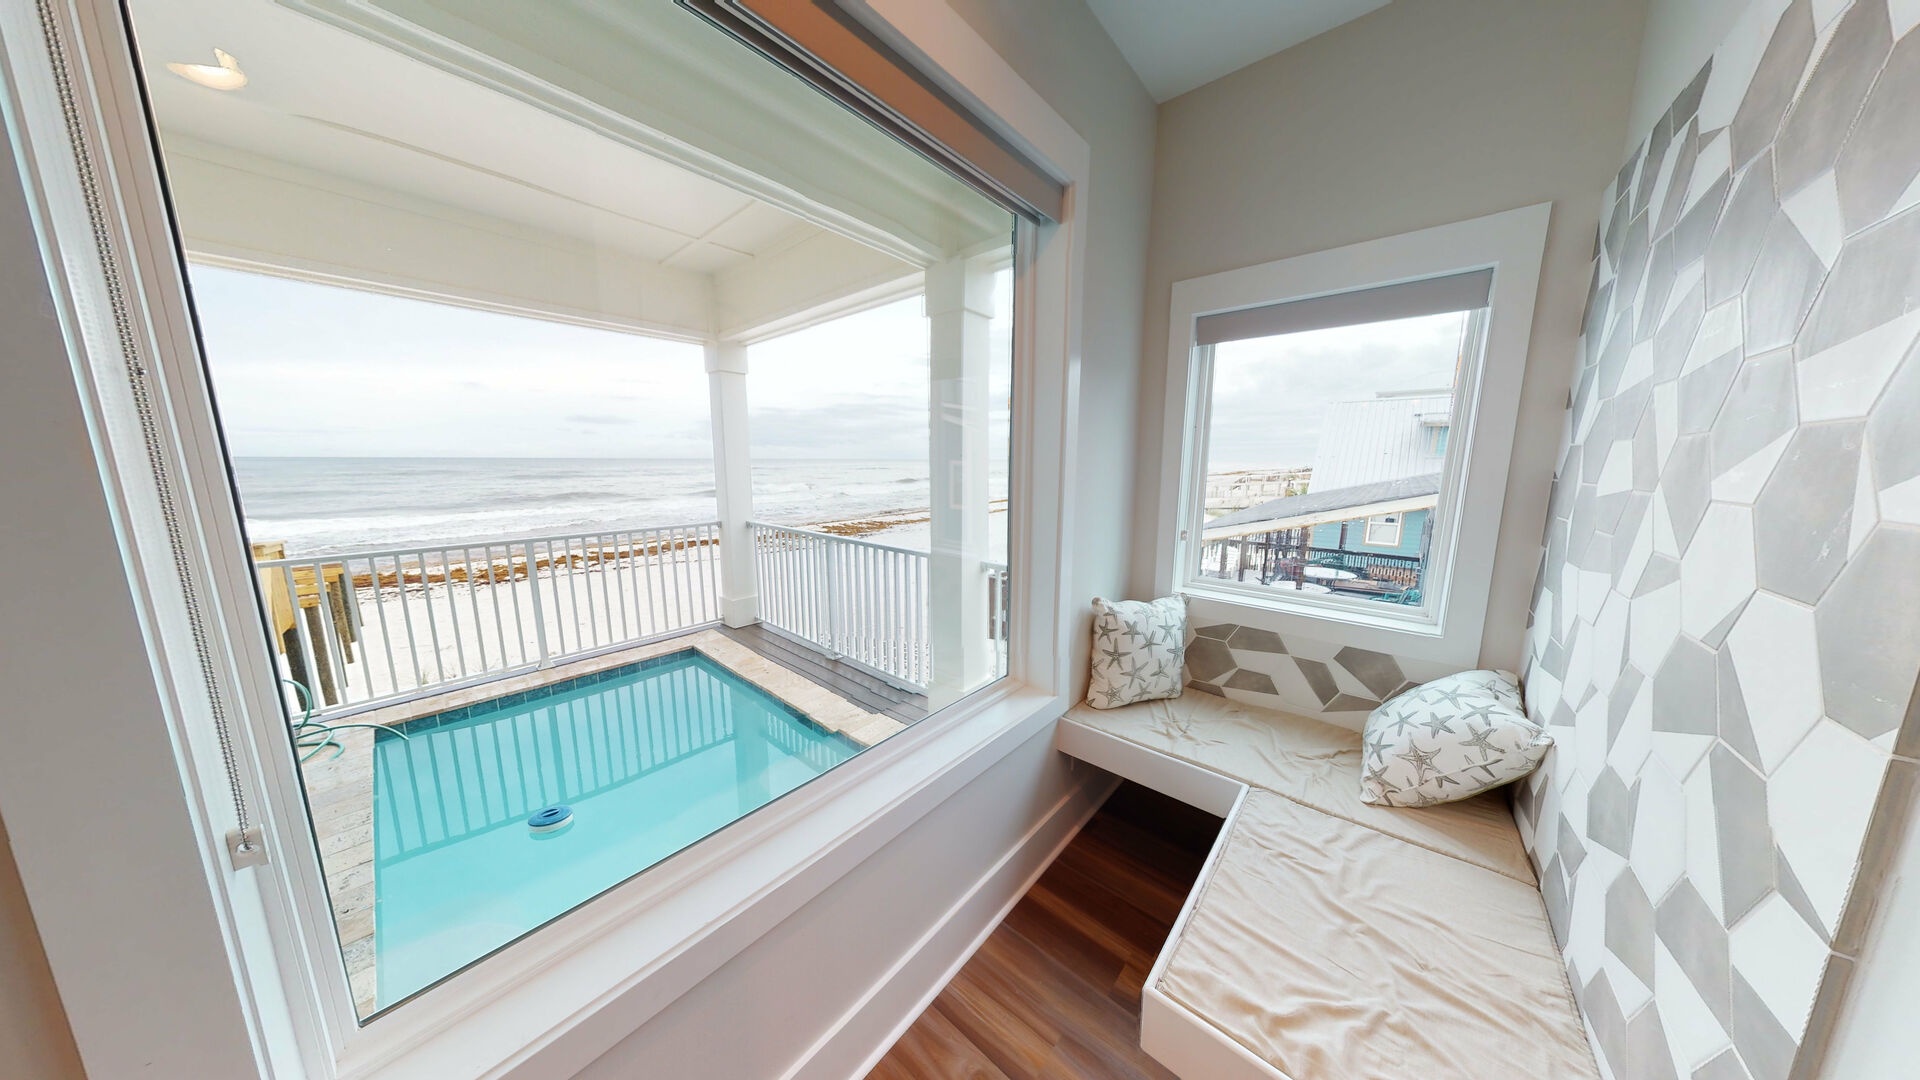 Fantastic views of the pool , beach and Gulf from the cozy window seat on the 1st floor